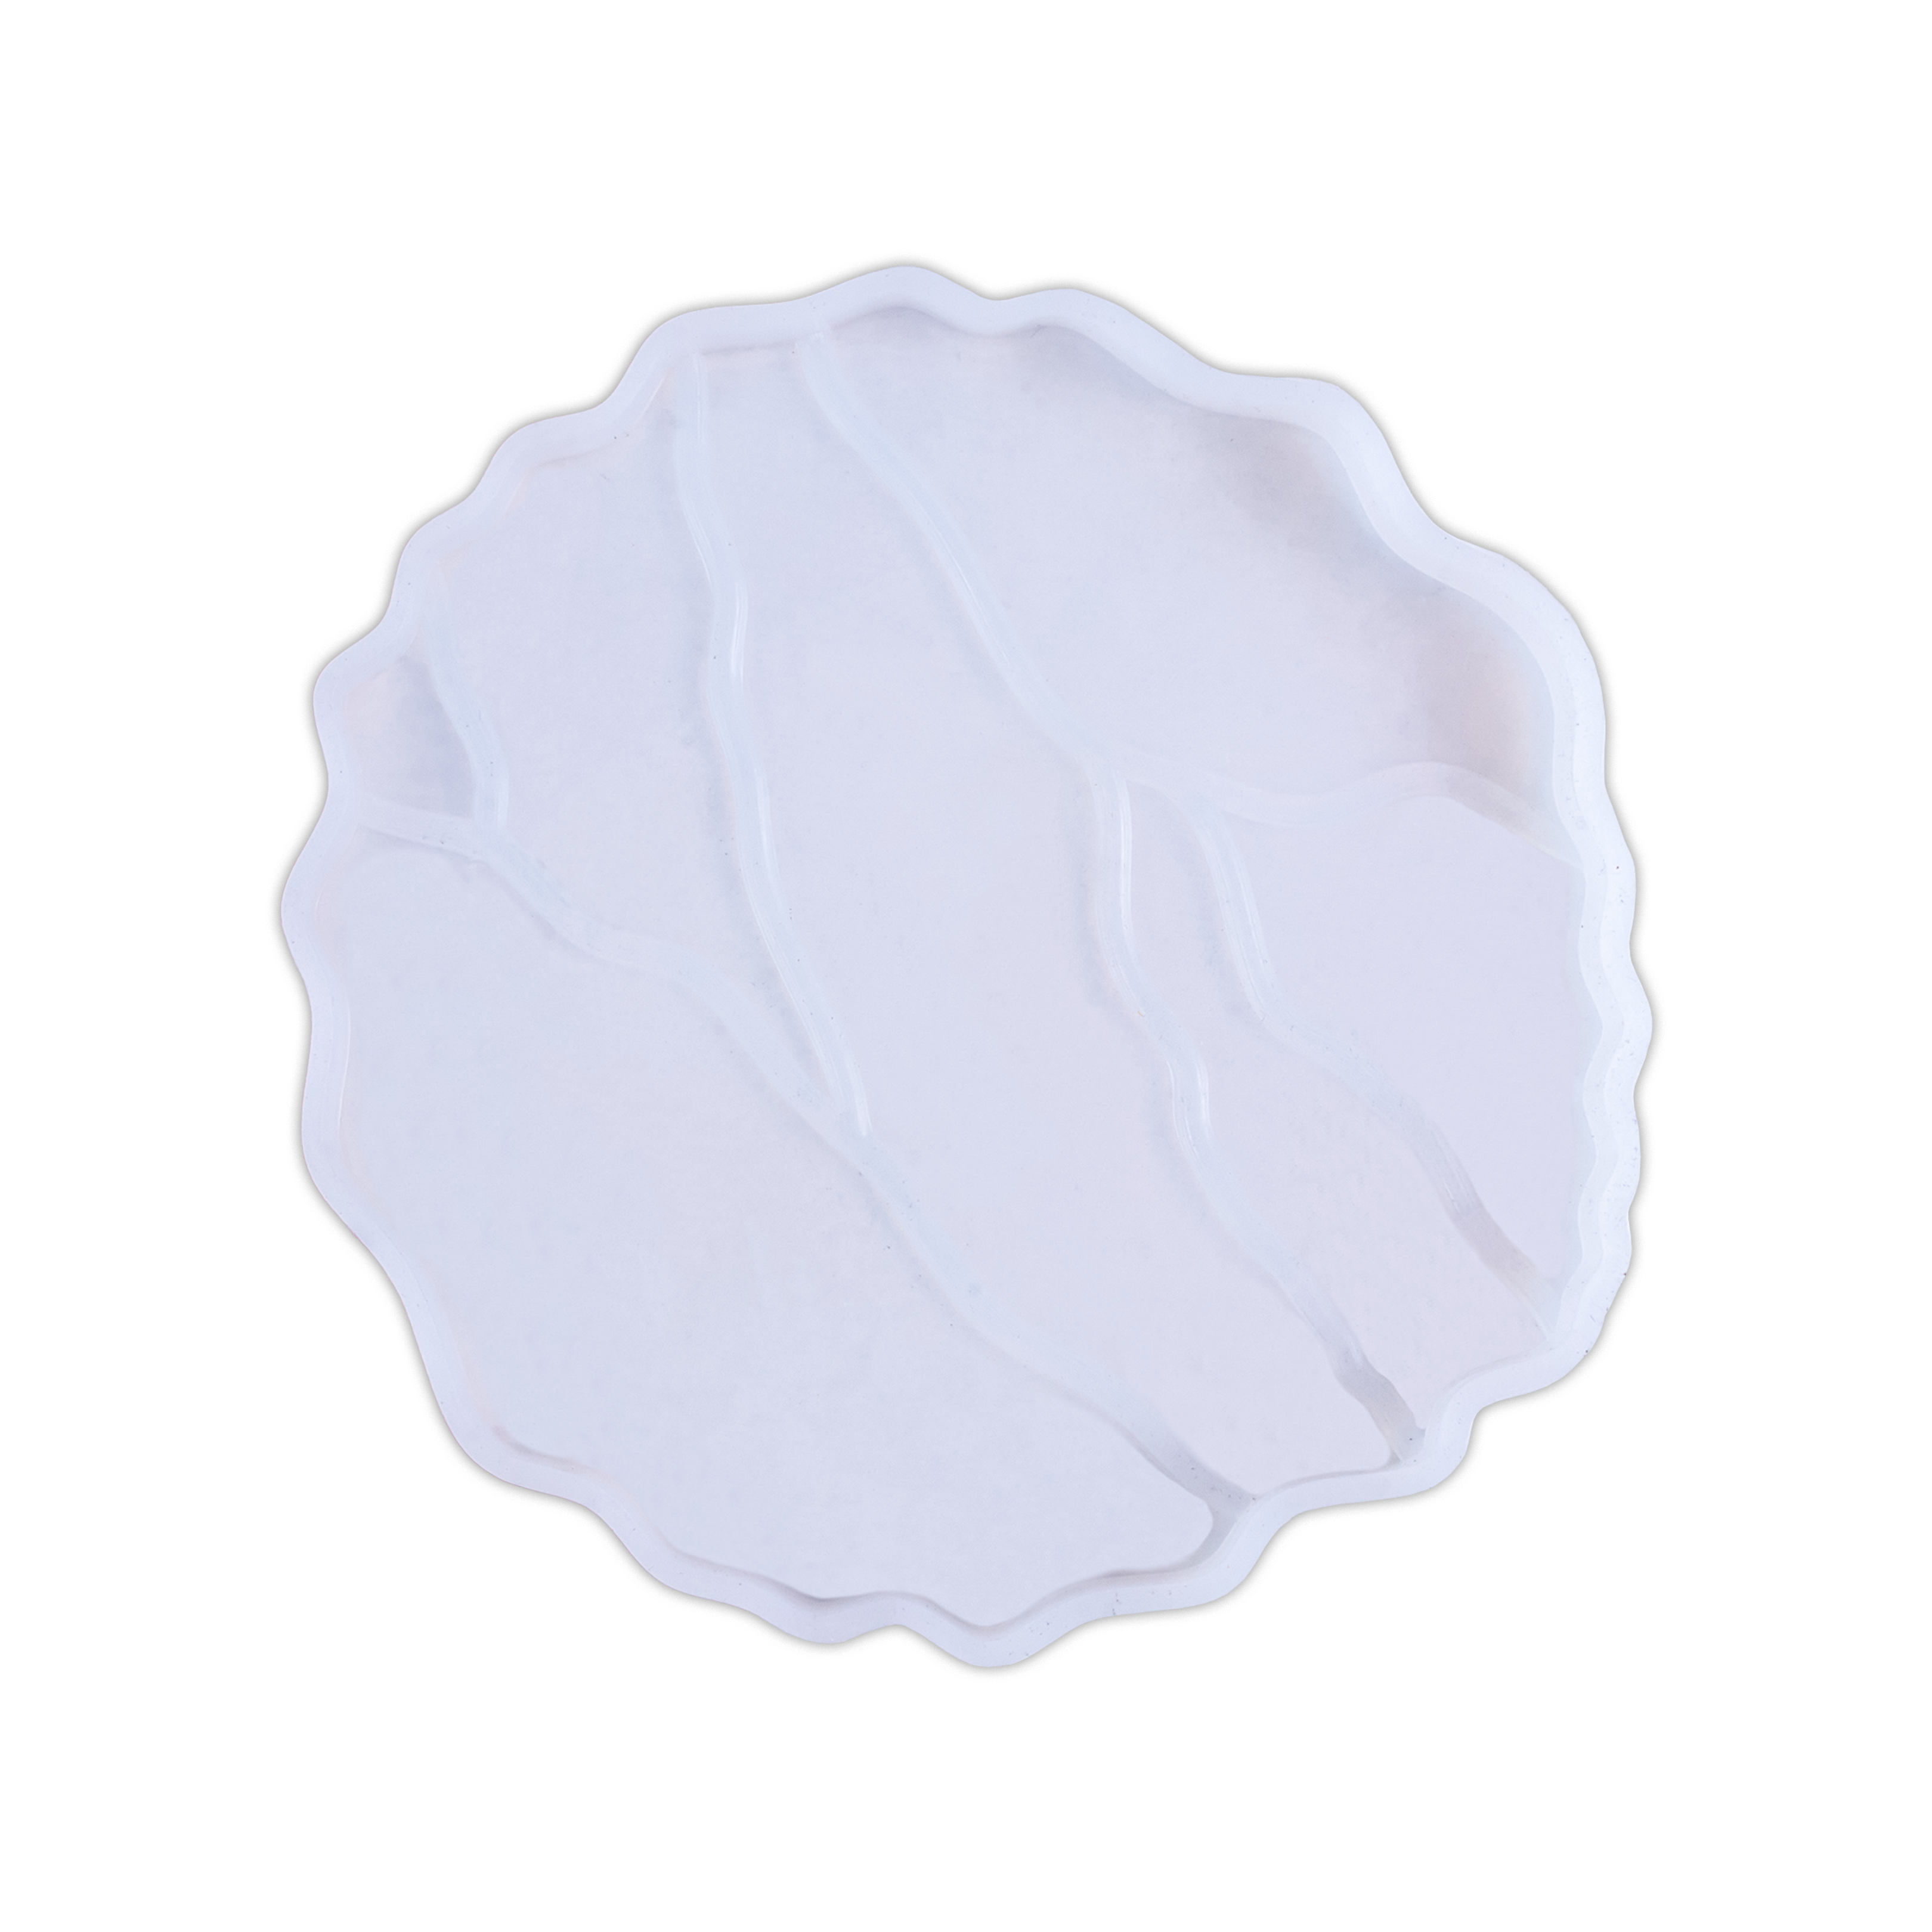 Silicone Coaster Mould - Round Cracked Pattern - 4.75 Inch D-7.87mm